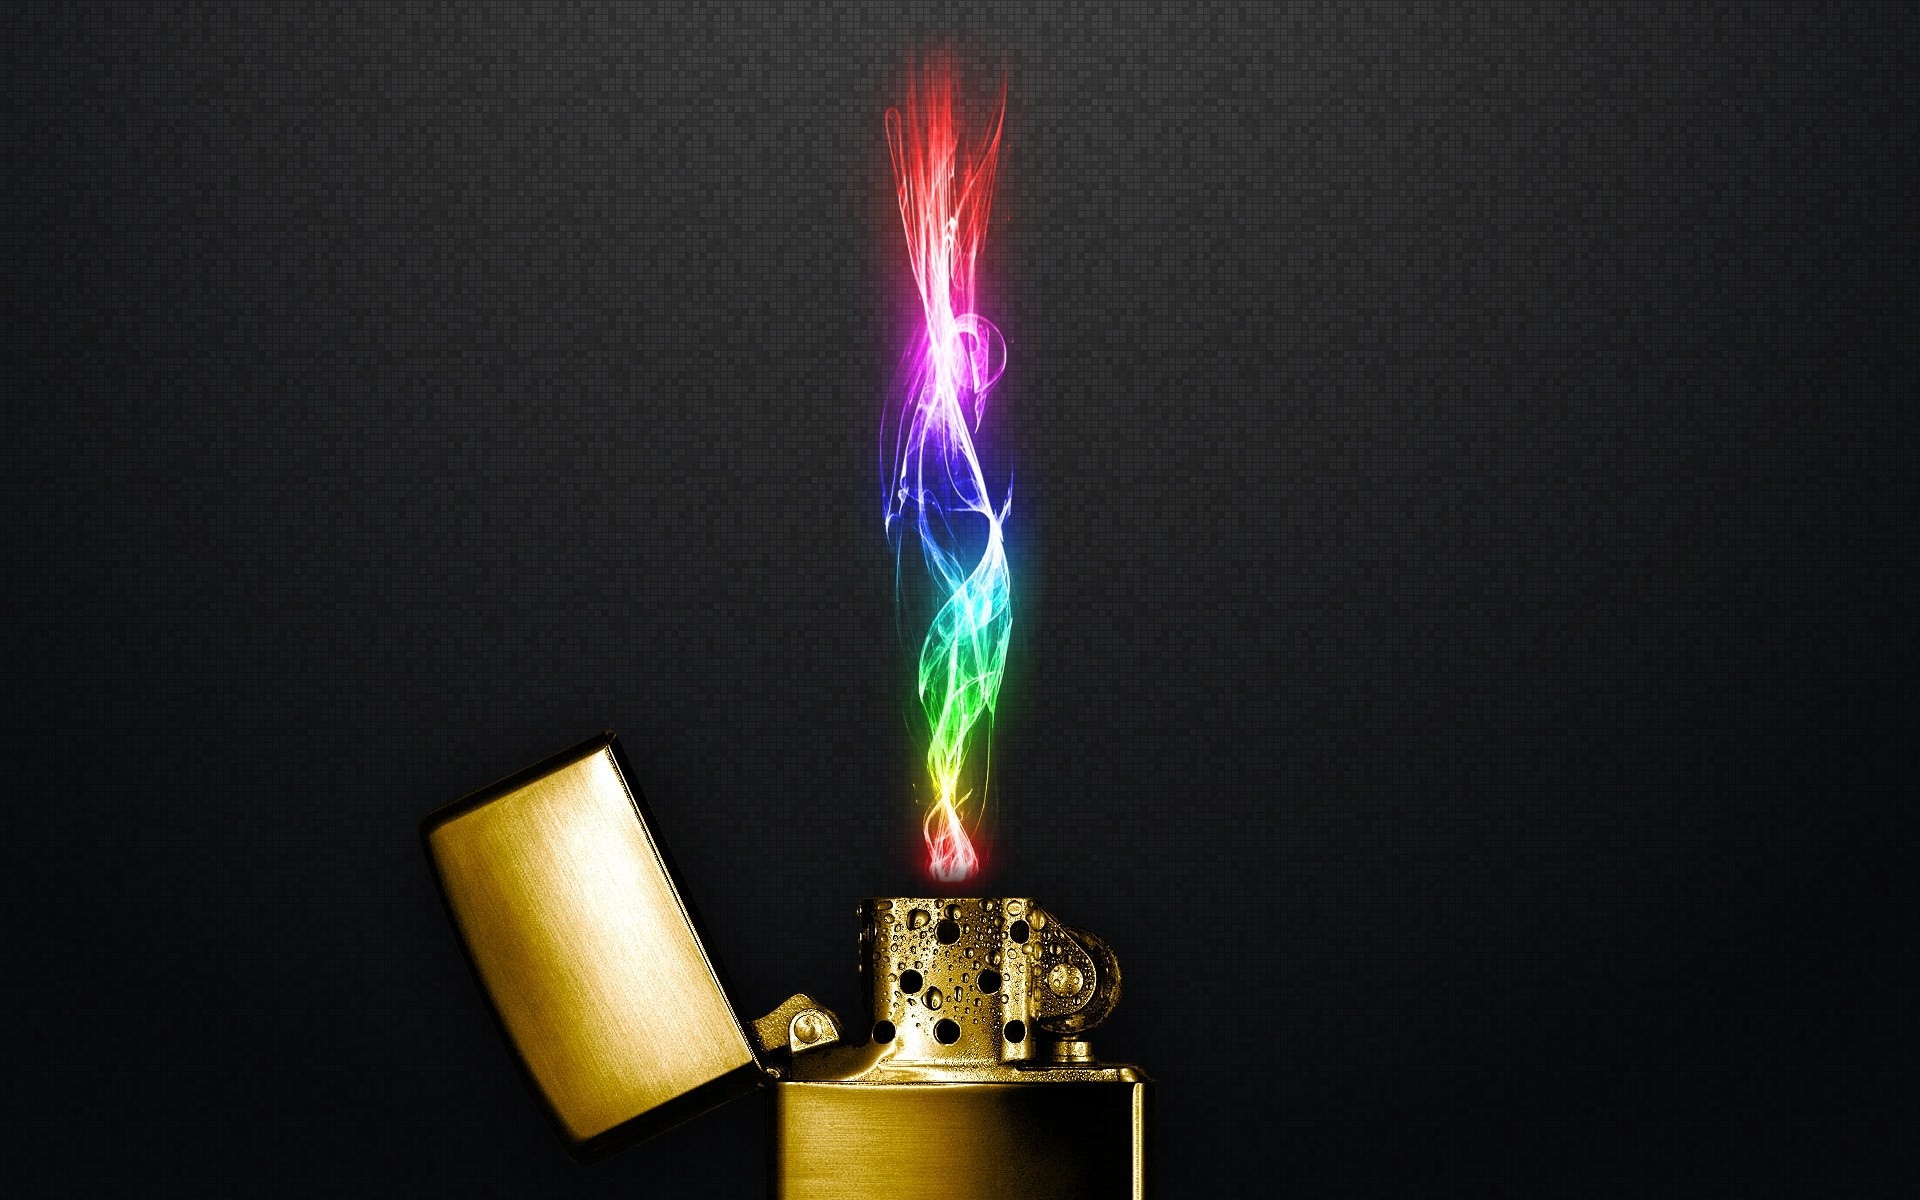 Full HD Wallpaper Of Zippo Lighters The Best Image In